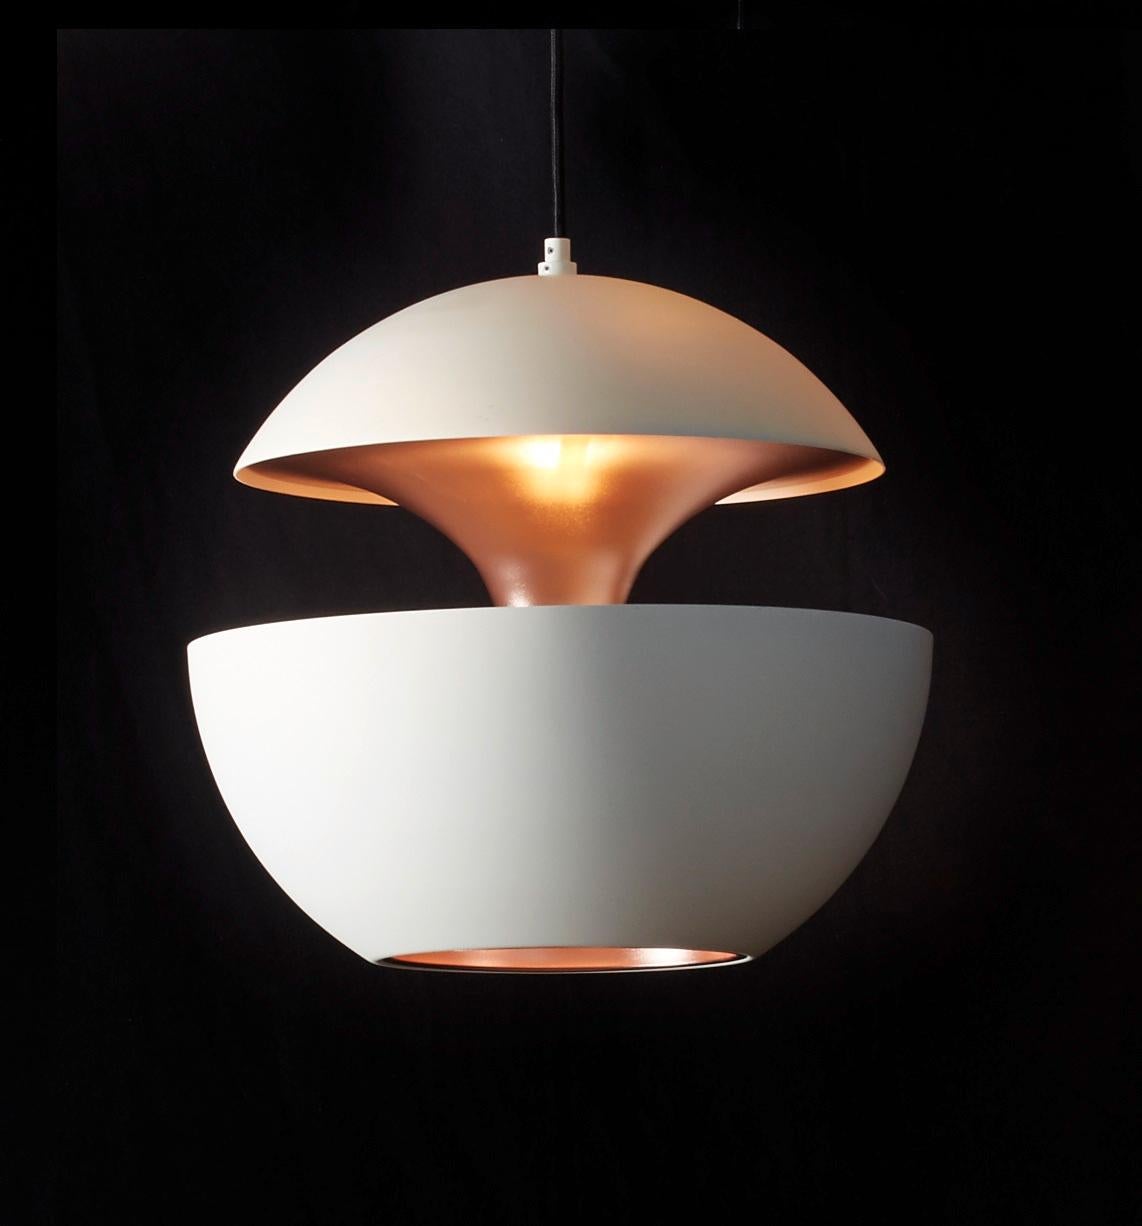 Here comes the sun large white and copper pendant lamp by Bertrand Balas
Dimensions: D 35 x H 35 cm
Materials: Aluminum
Available in different sizes and colors.

All our lamps can be wired according to each country. If sold to the USA it will